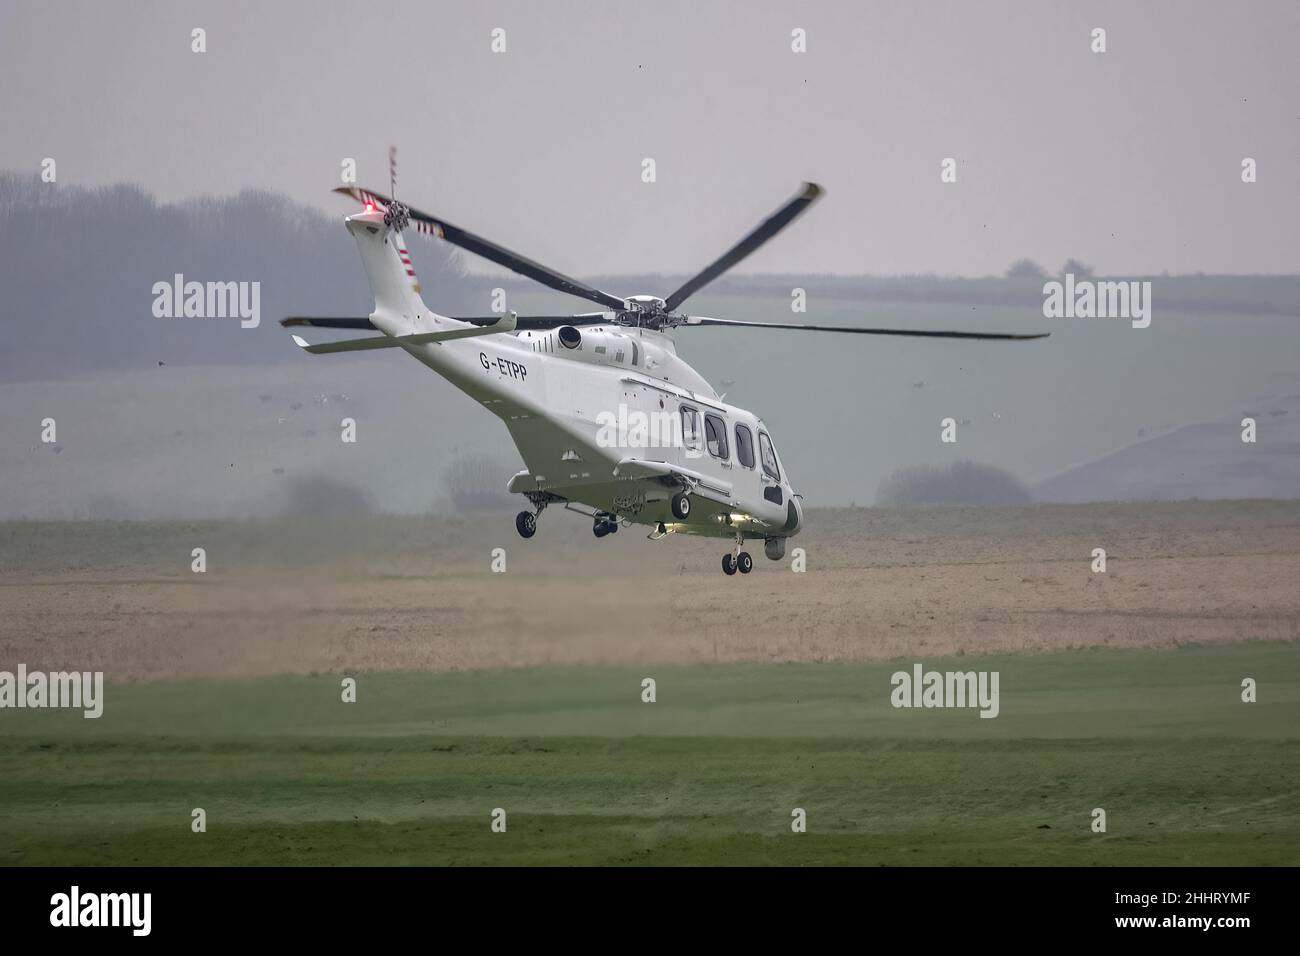 G-ETPP ETPS Agusta AW139 helicopter pitches forwards and ascends from hovering just above grass on a pilot training flight exercise Stock Photo